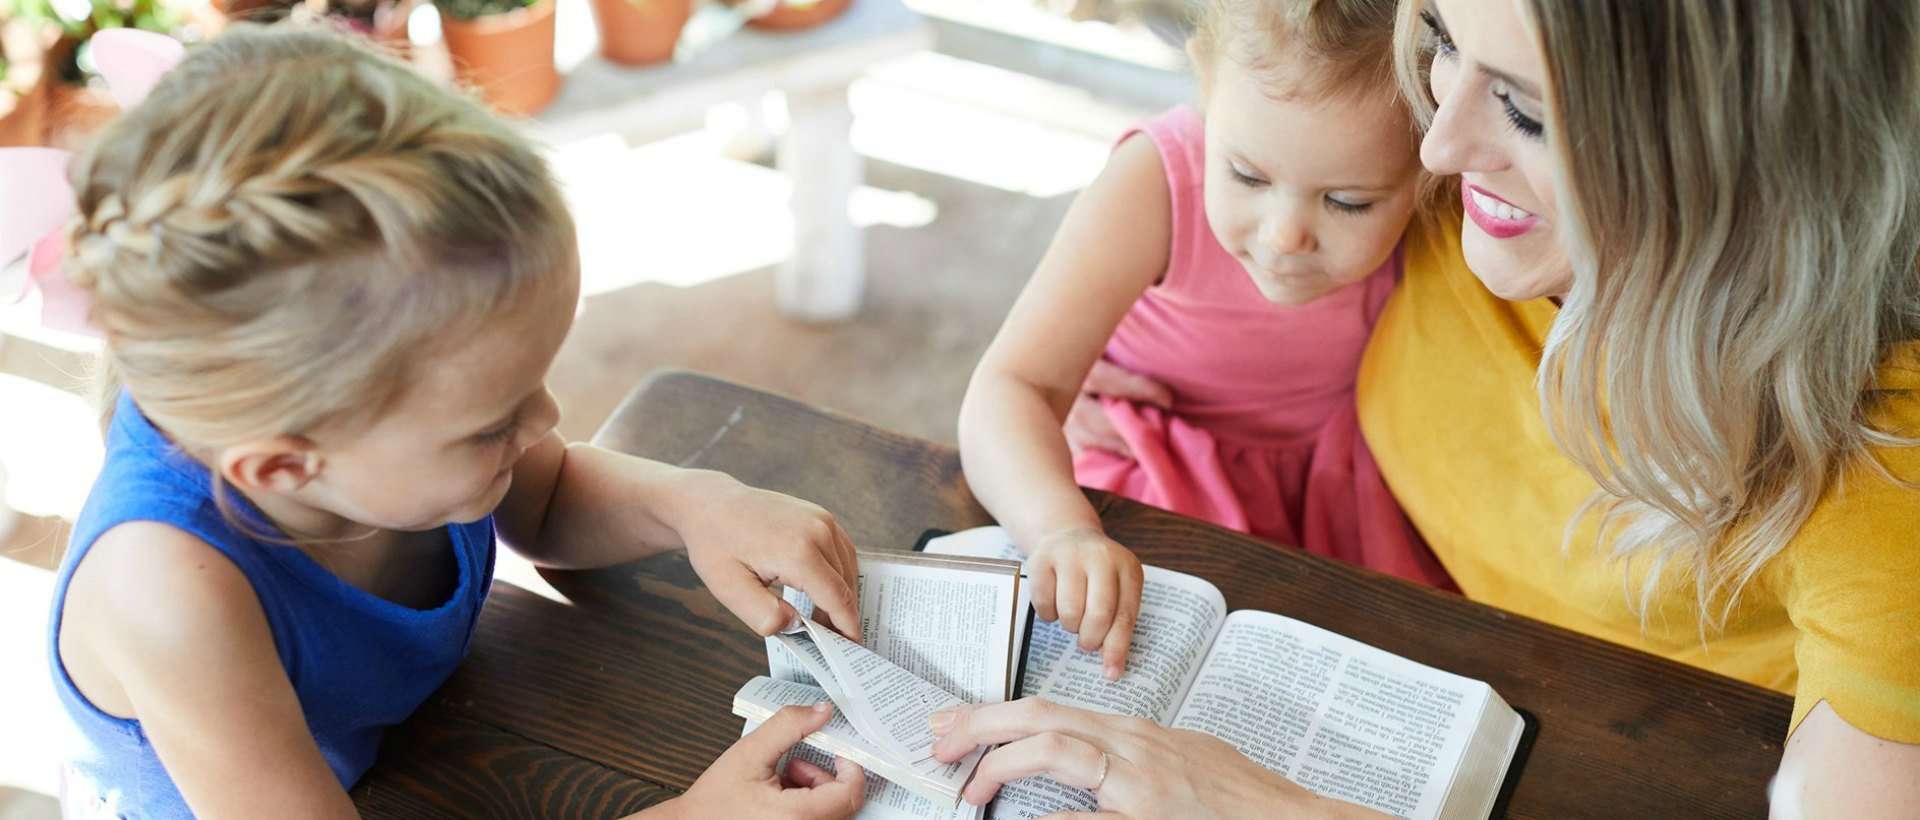 How to Teach Your Kids to Study the Bible